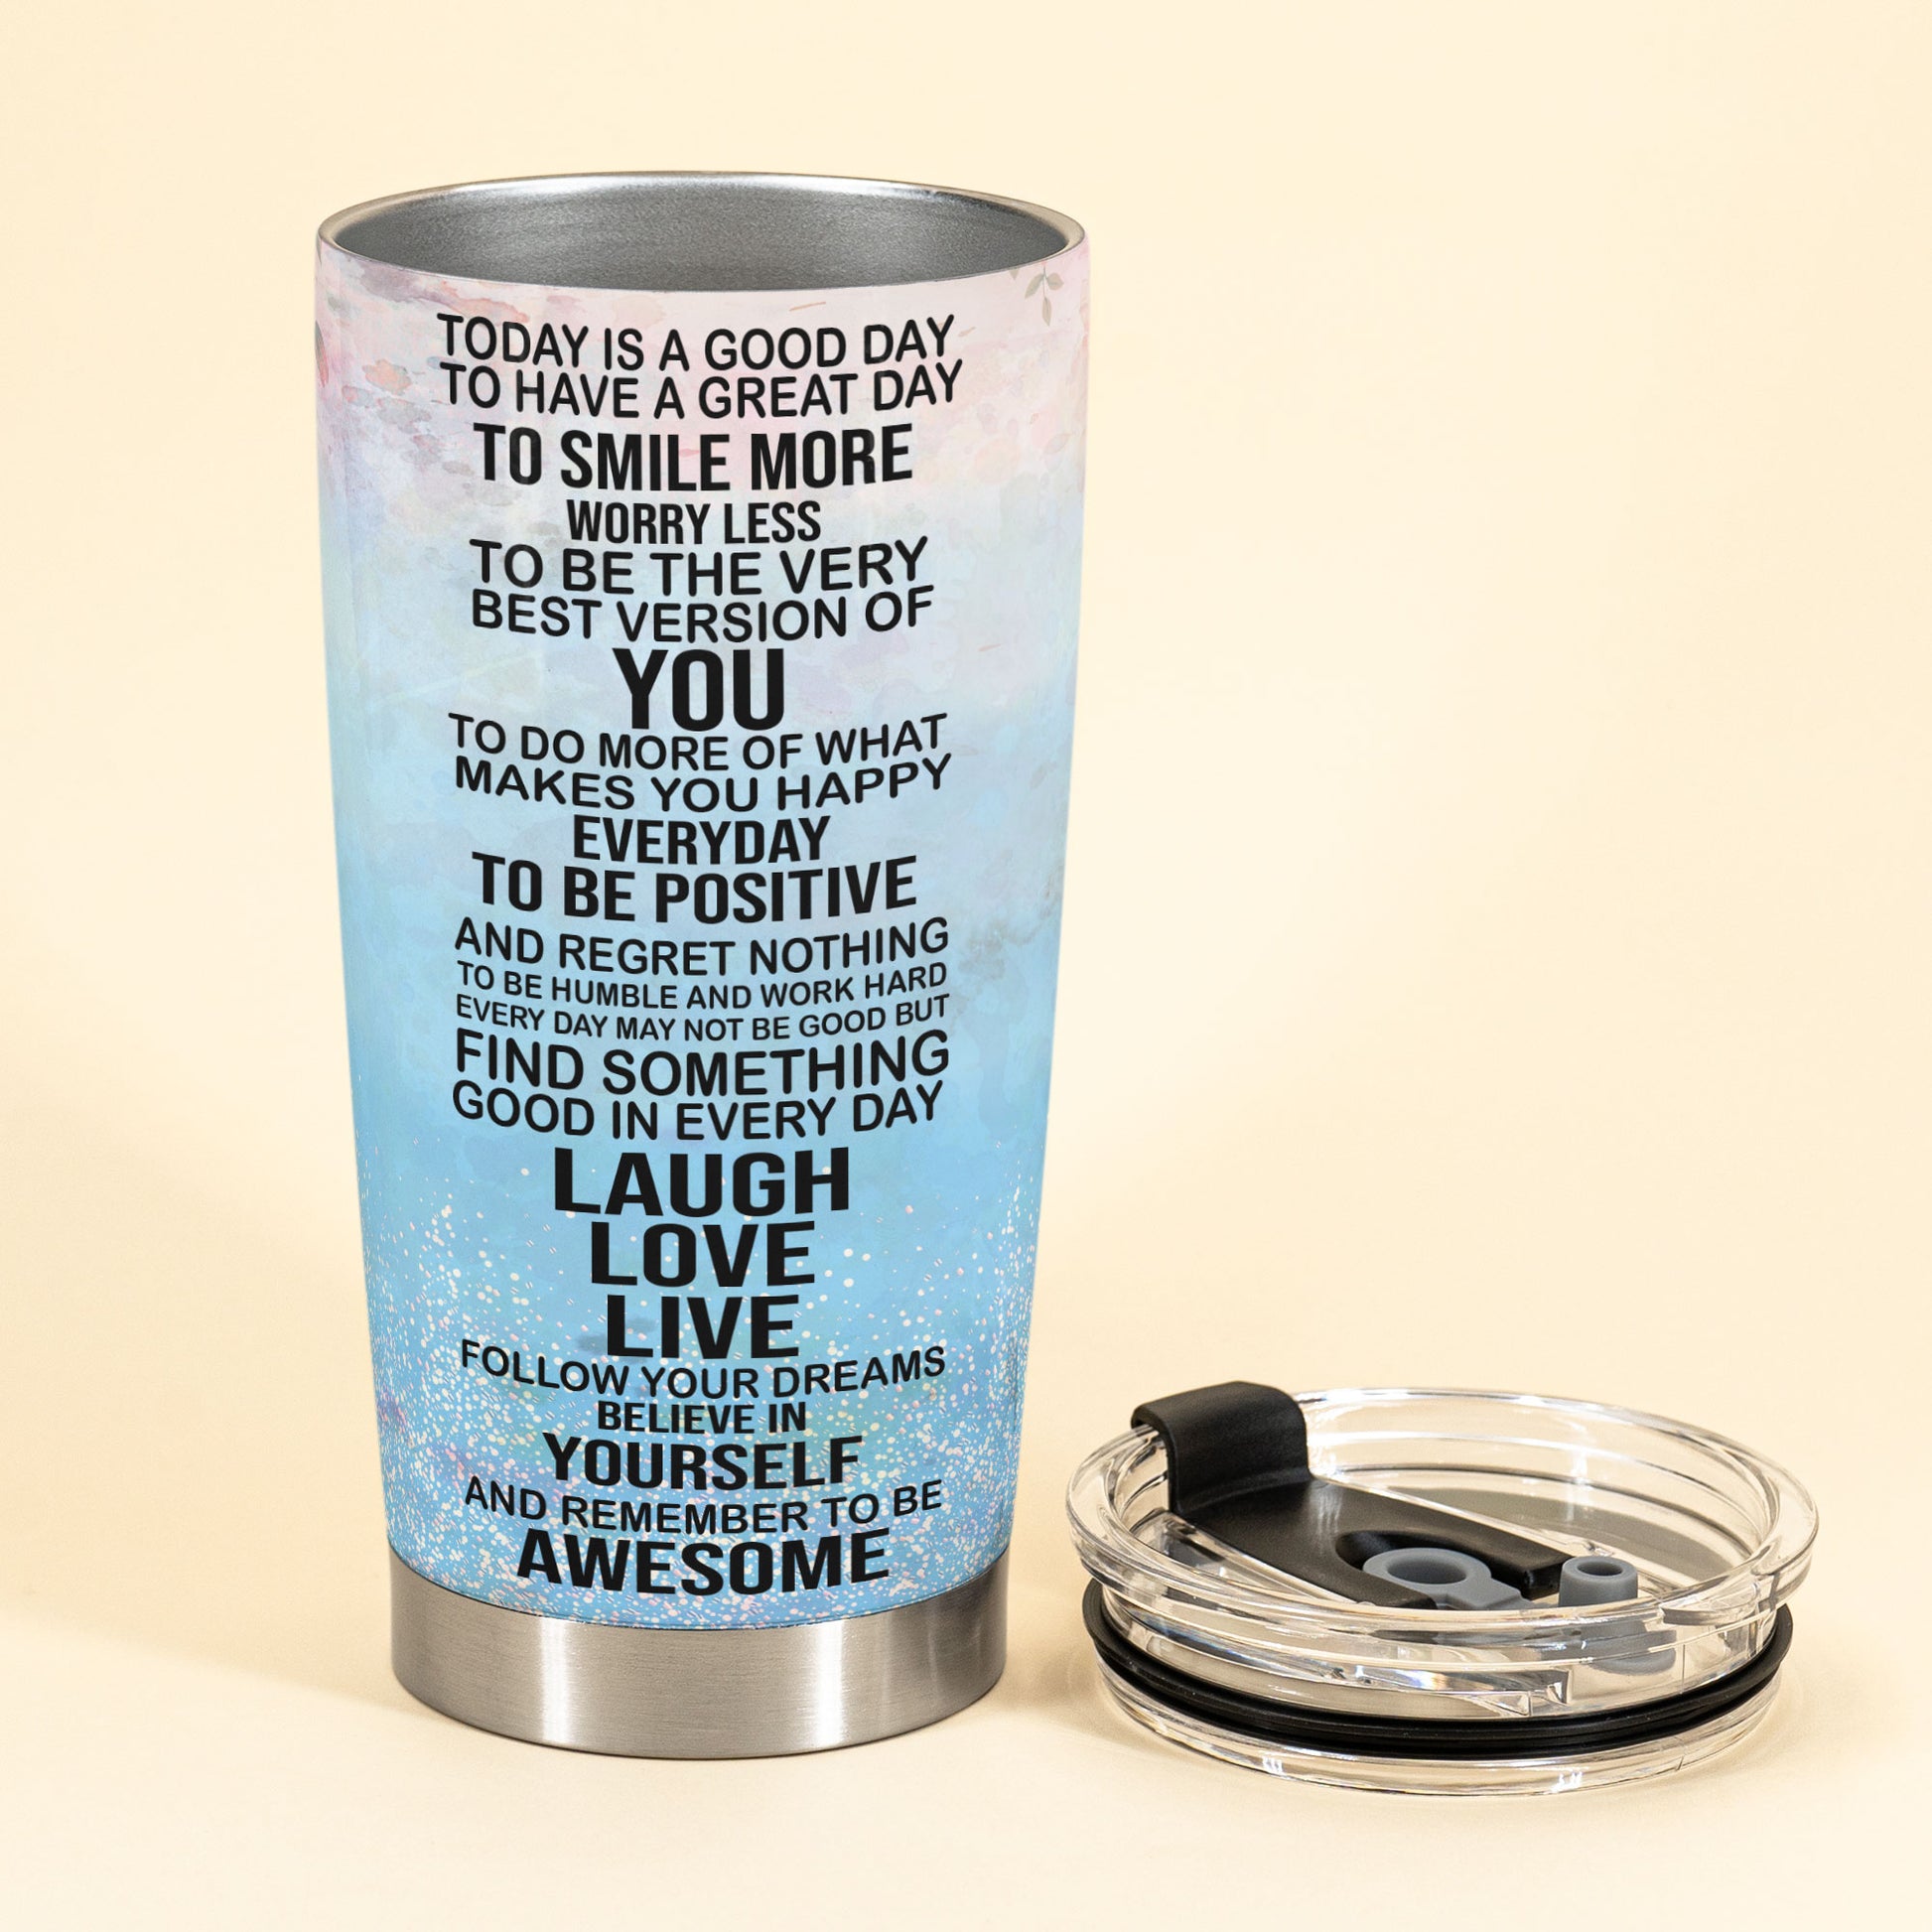 Today Is A Good Day - Personalized Tumbler Cup - Gift For Doctor & Nurse